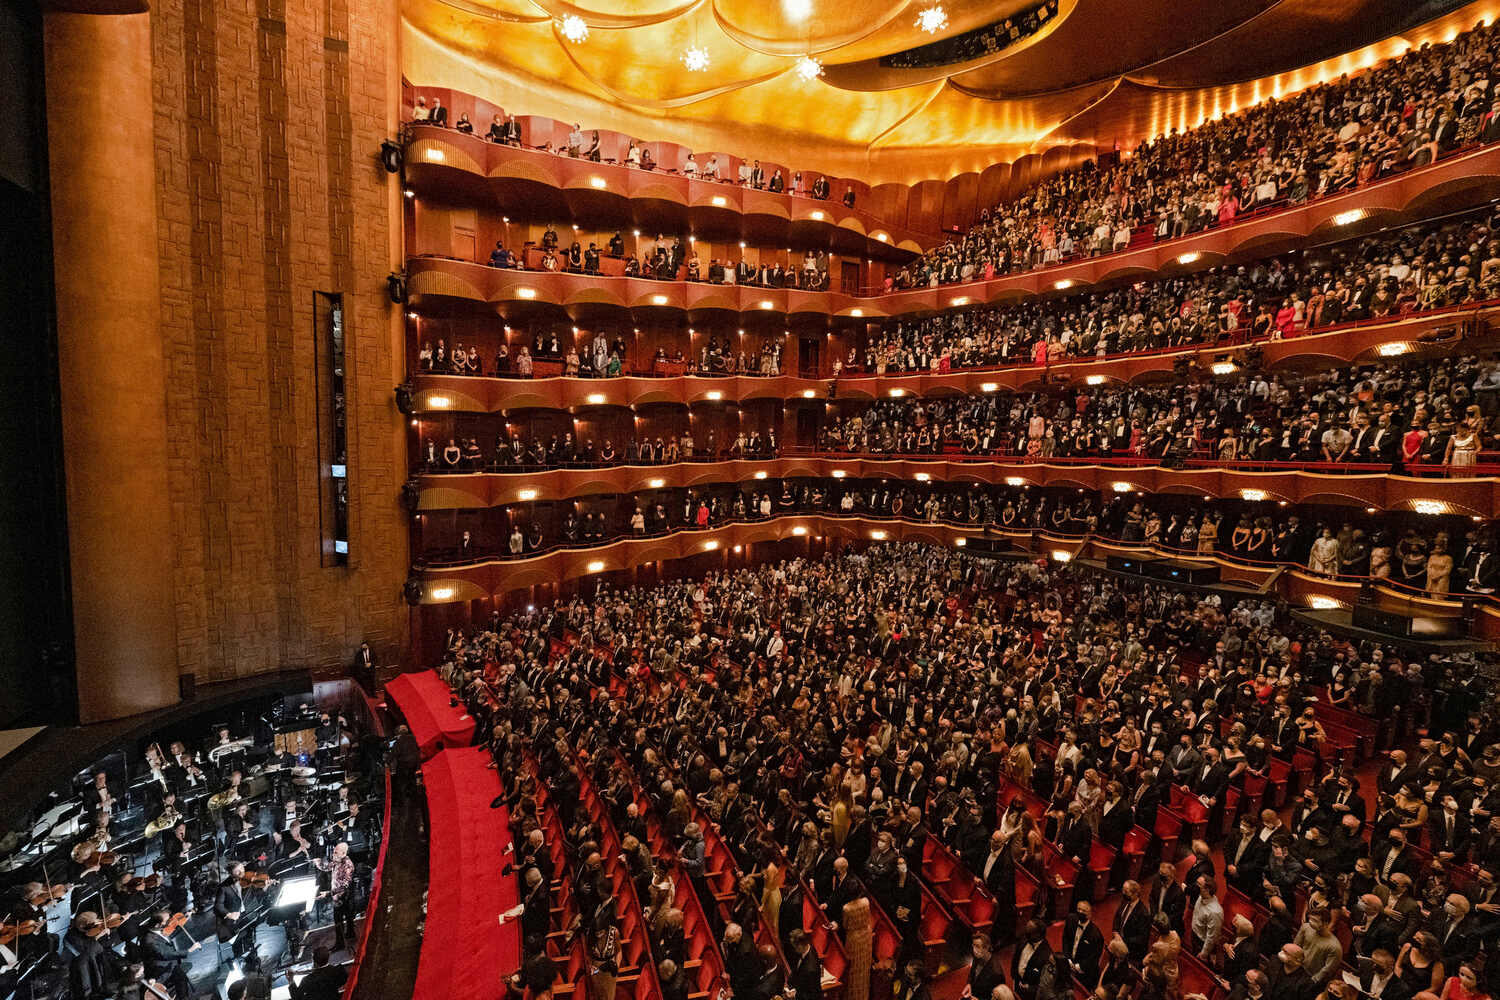 What Is The Average Size Of An Opera Orchestra At The Metropolitan Opera?